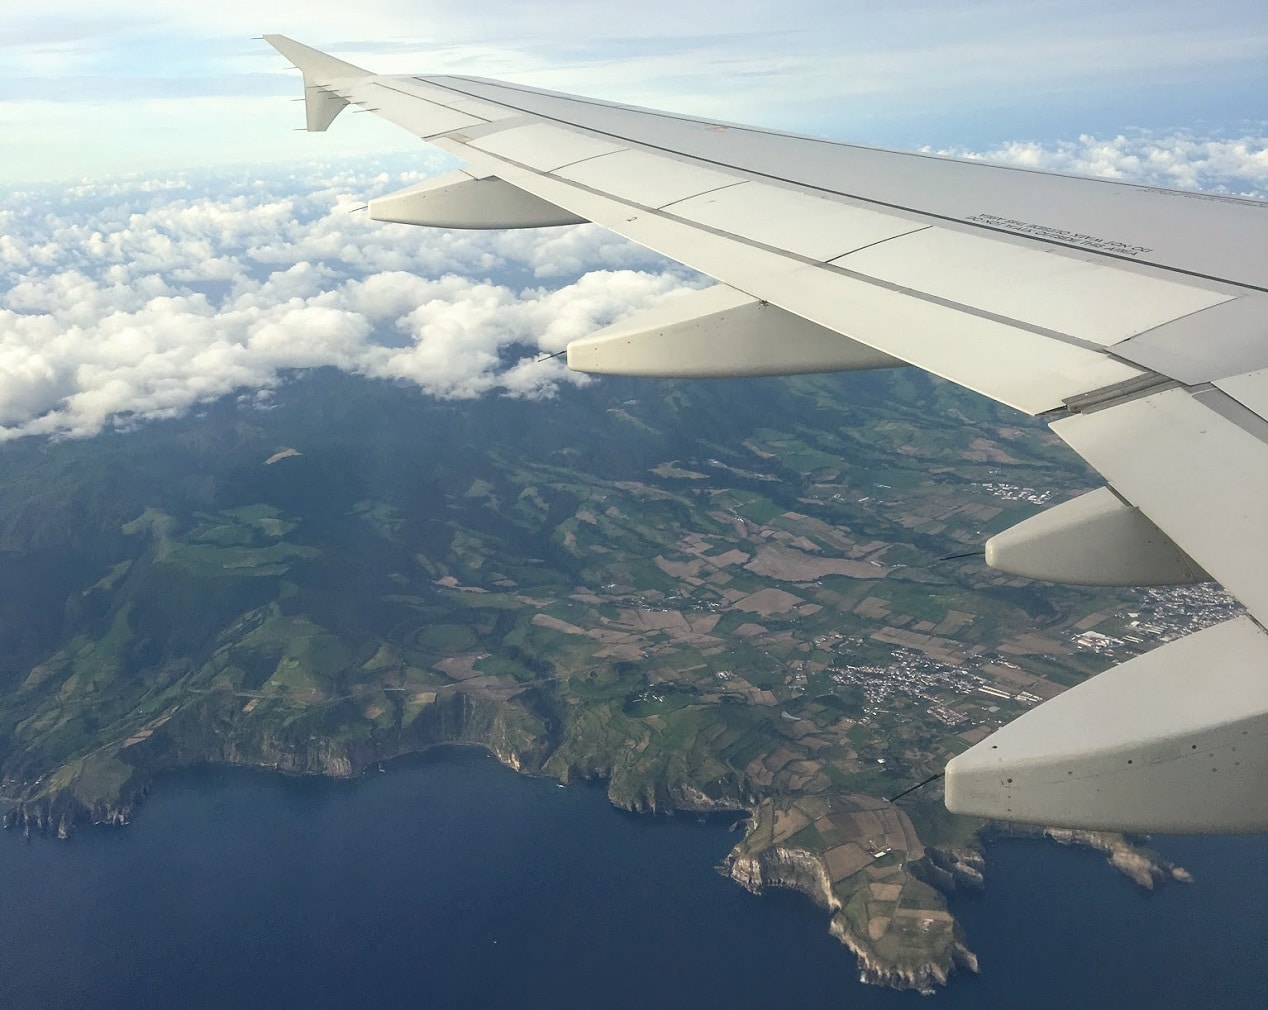 How to travel to the Azores